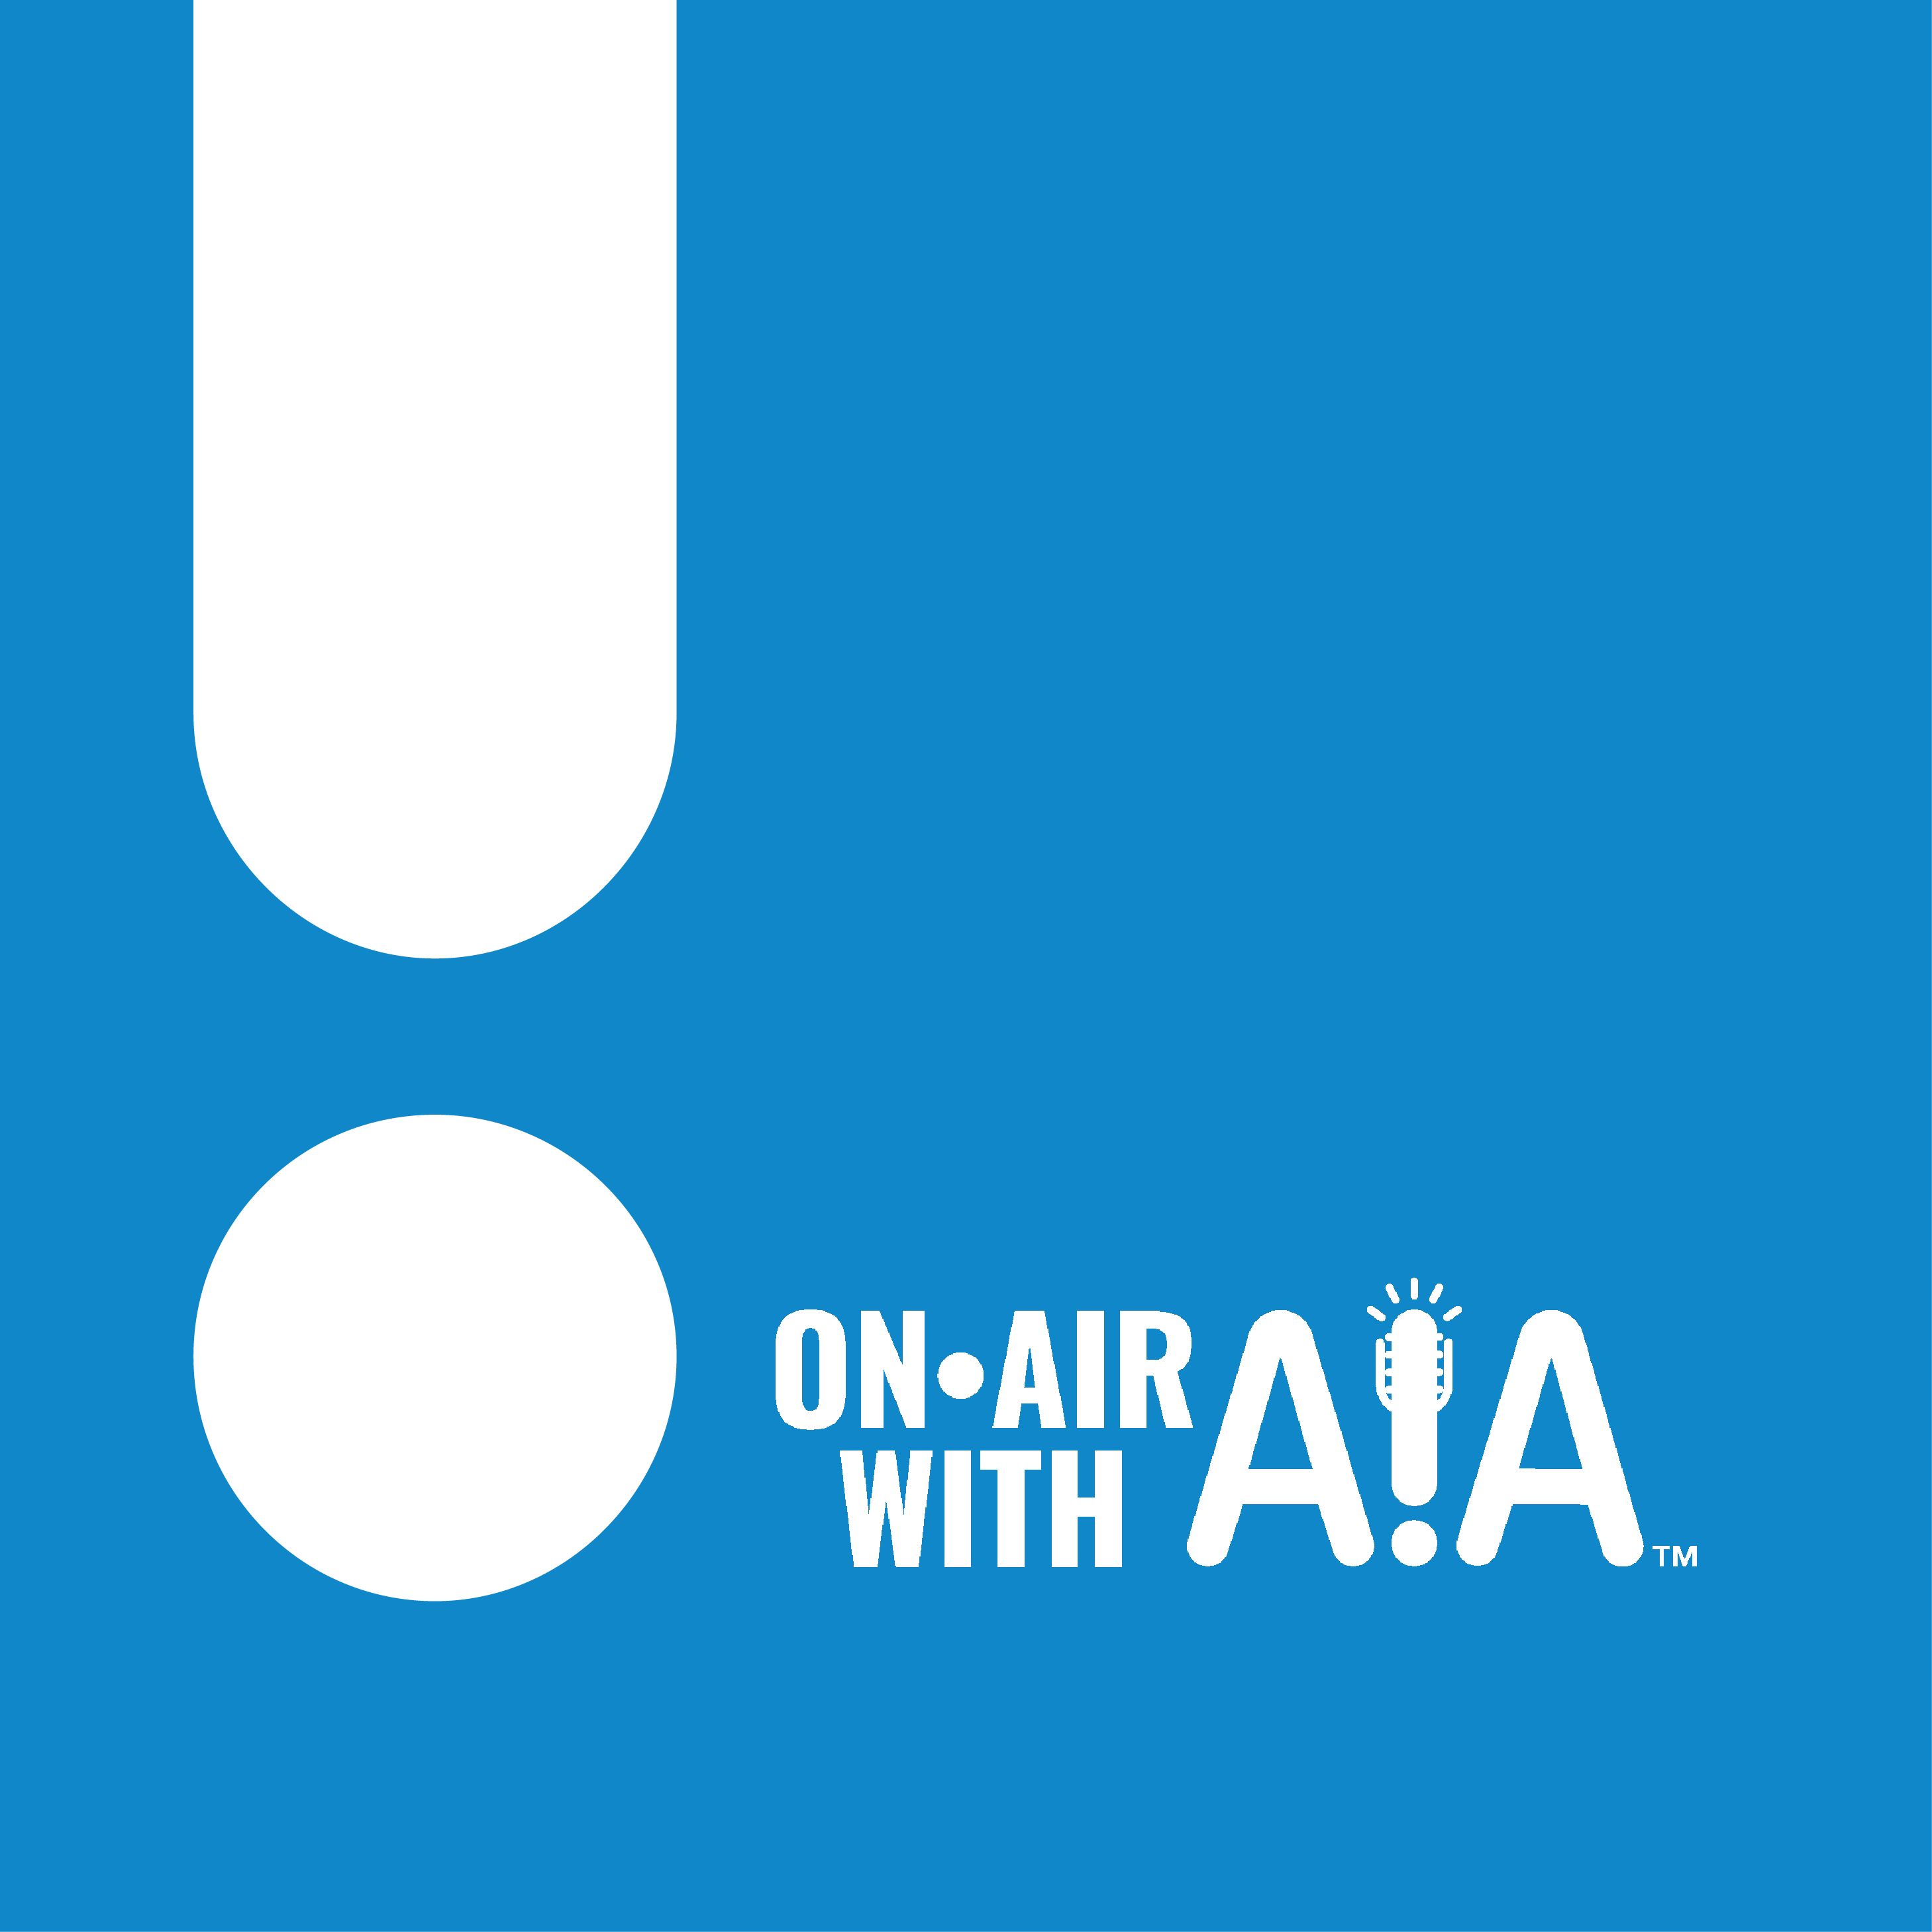 On Air with AIA